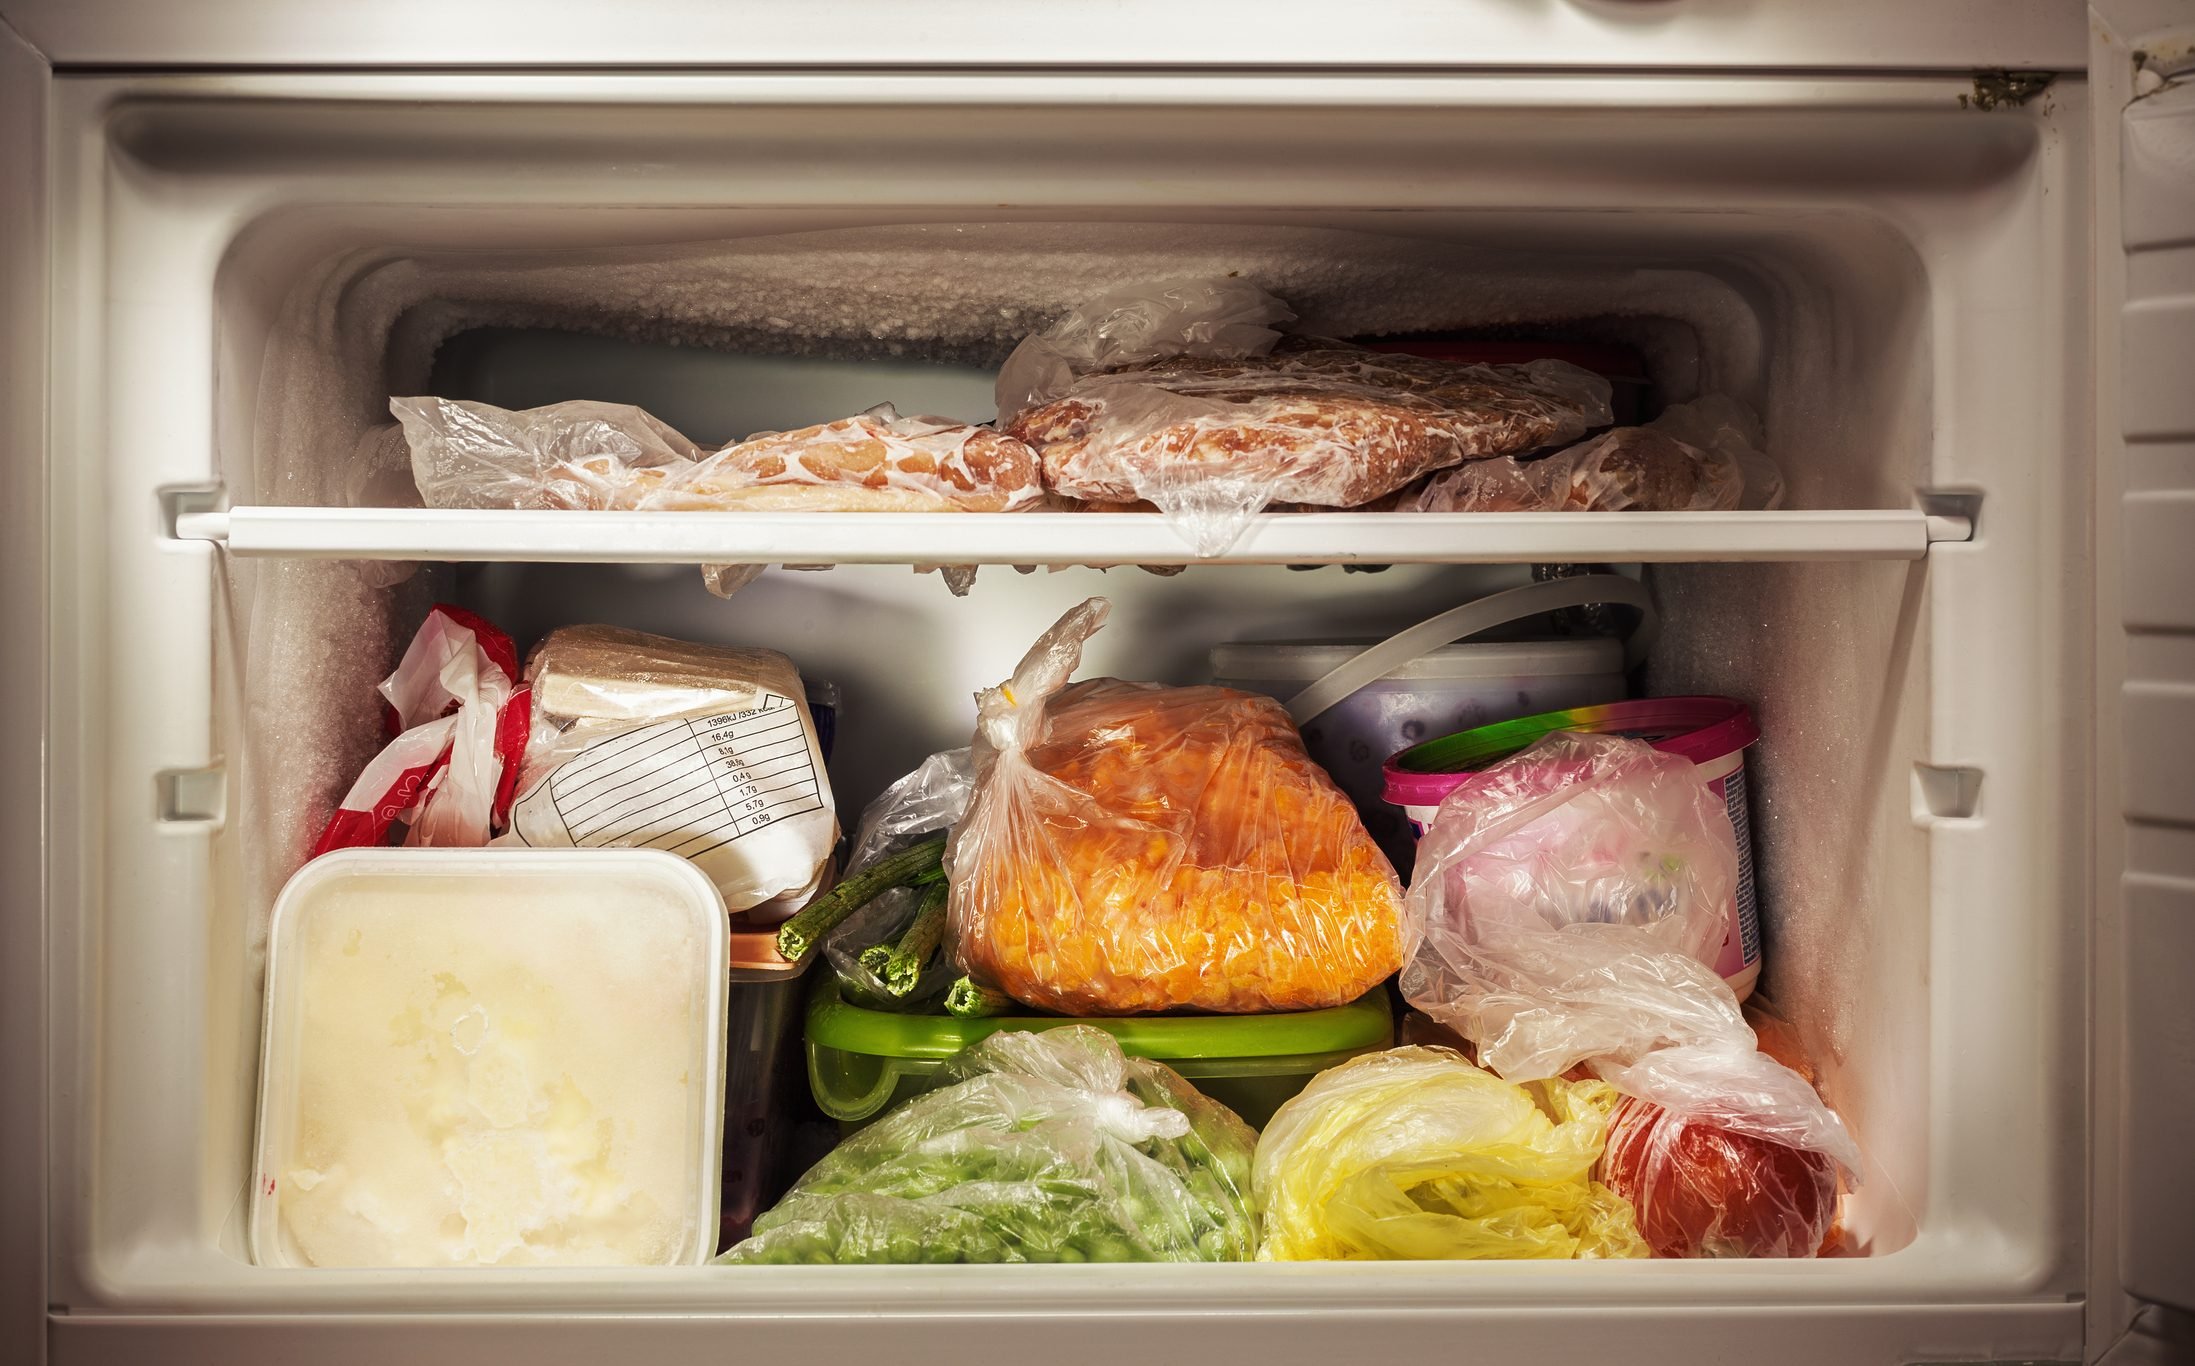 Why Is My Freezer Not Freezing?